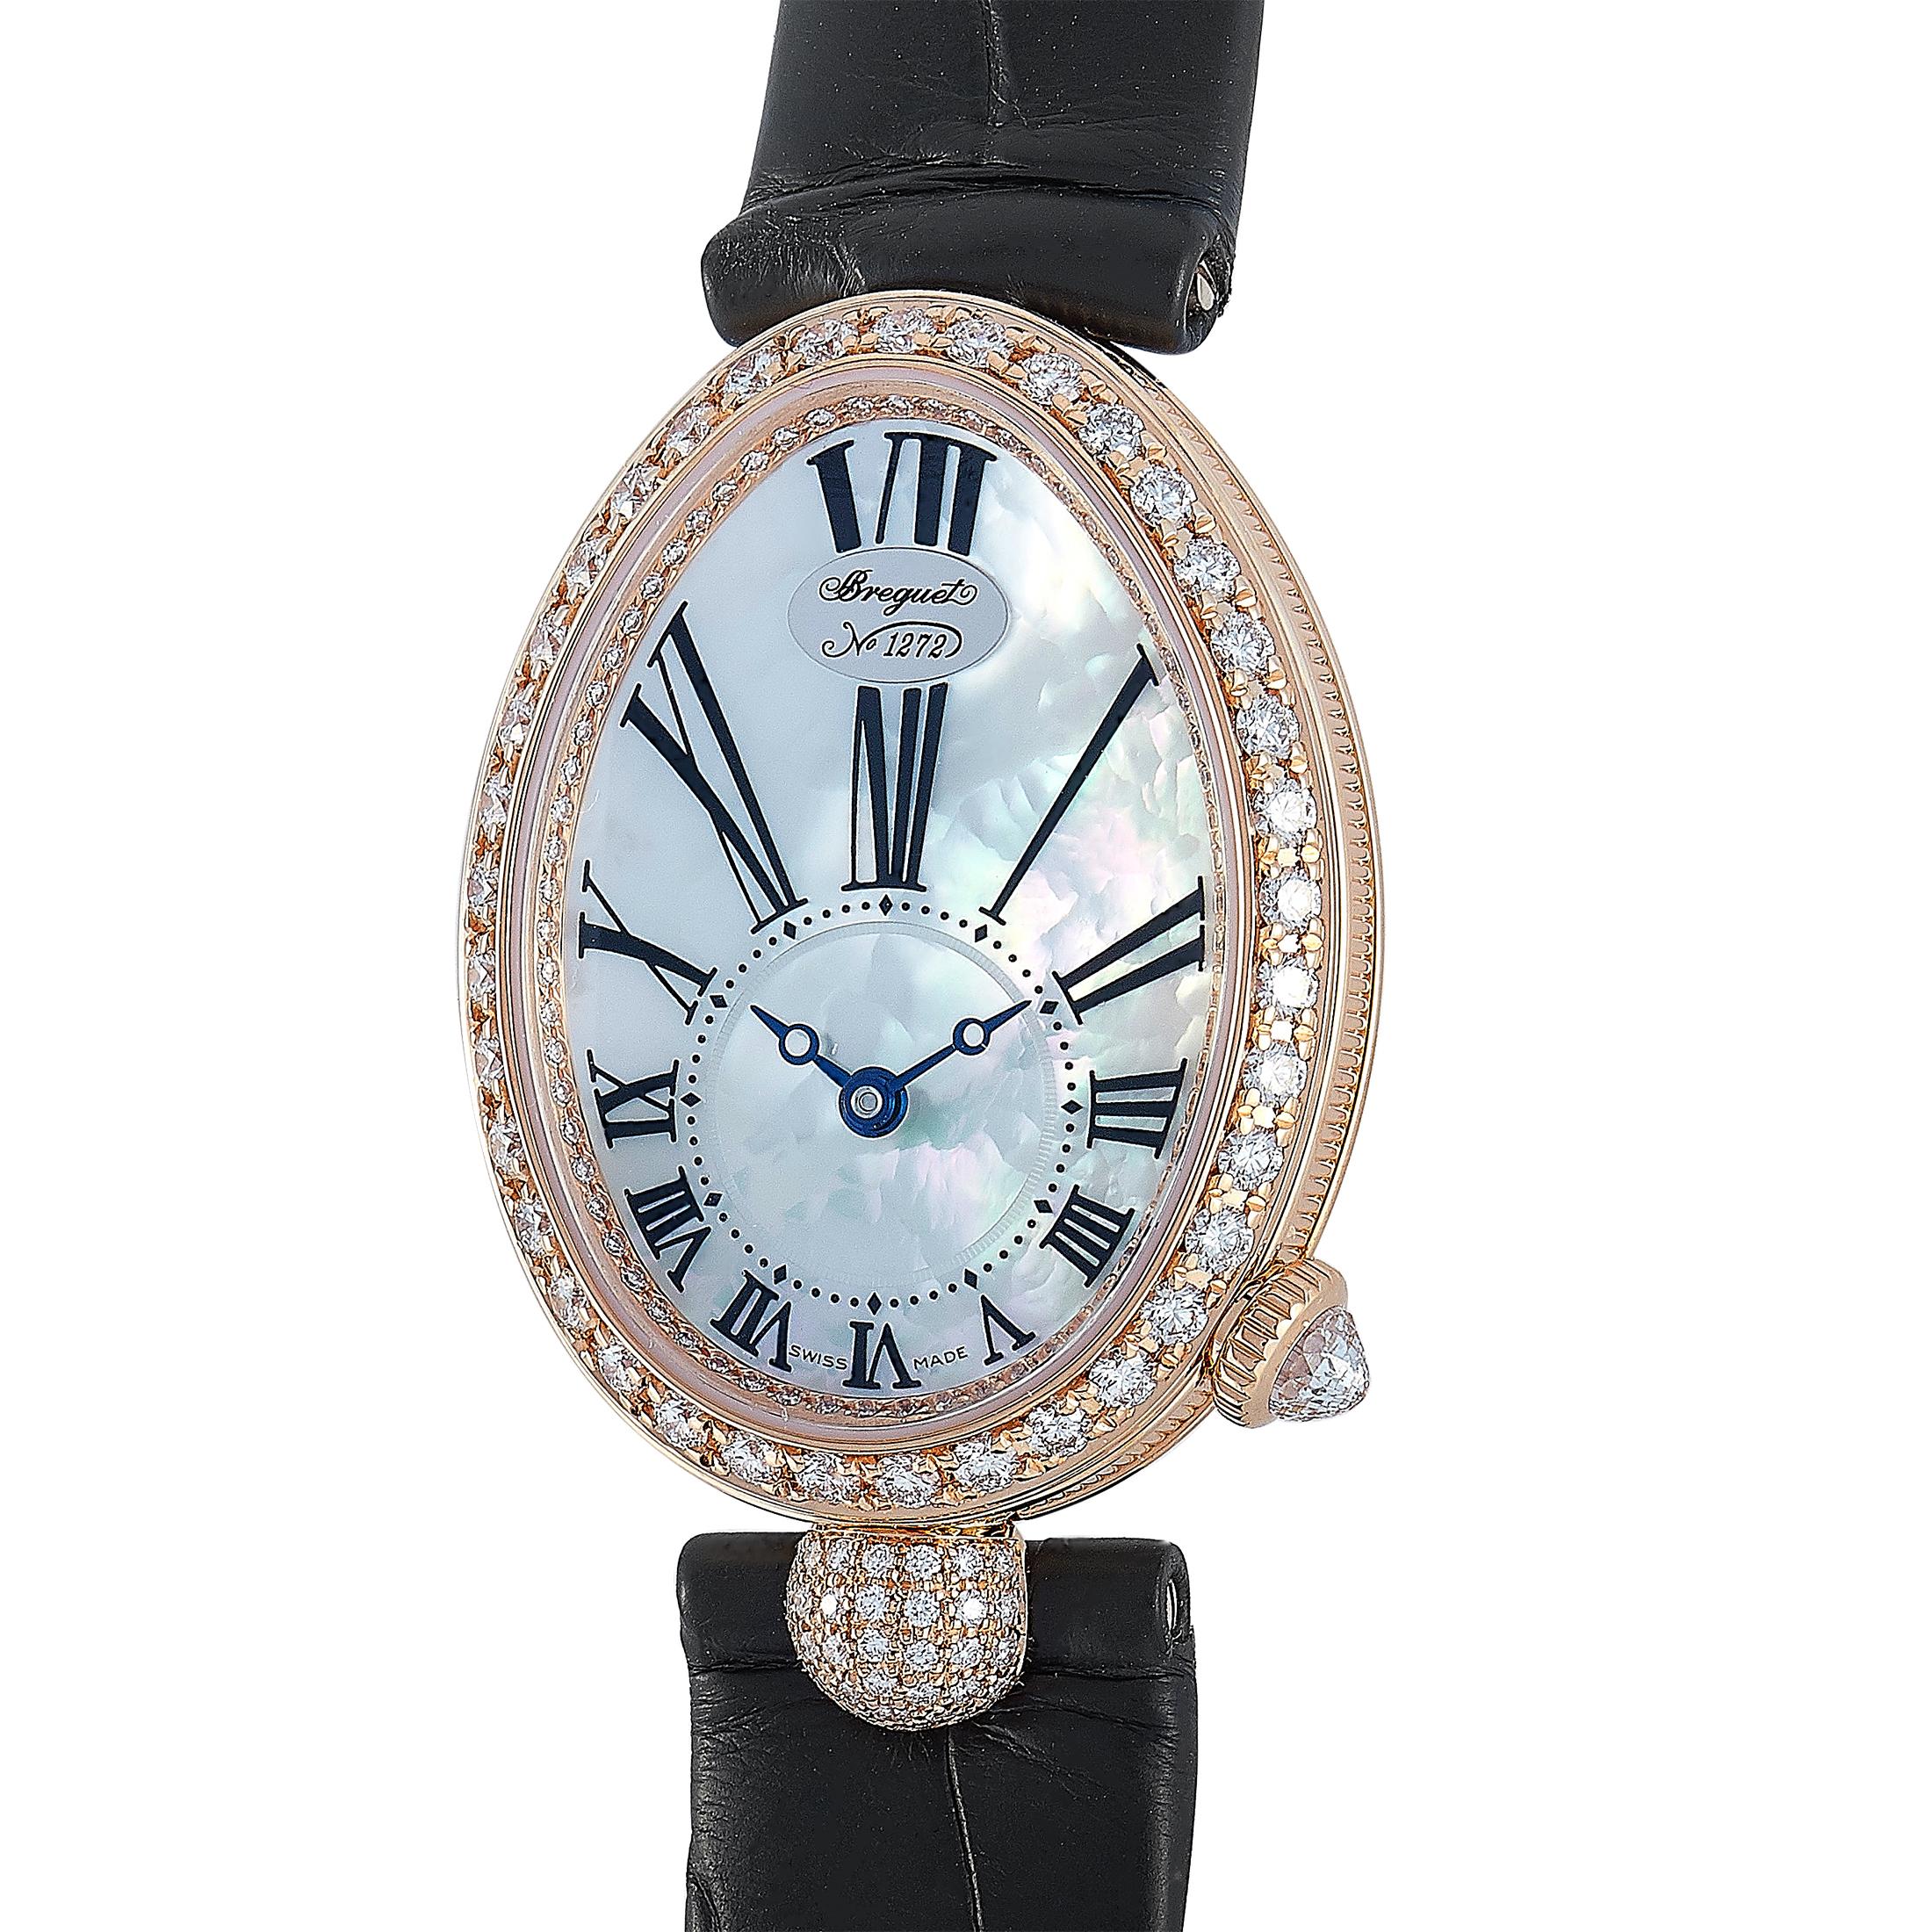 The Breguet Reine de Naples 8928 watch, reference number 8928BR/51/944 DD0D, is presented within the sublime “Reine de Naples” collection.

This timepiece boasts a diamond-set 18K rose gold case that is mounted onto a black leather strap, secured on